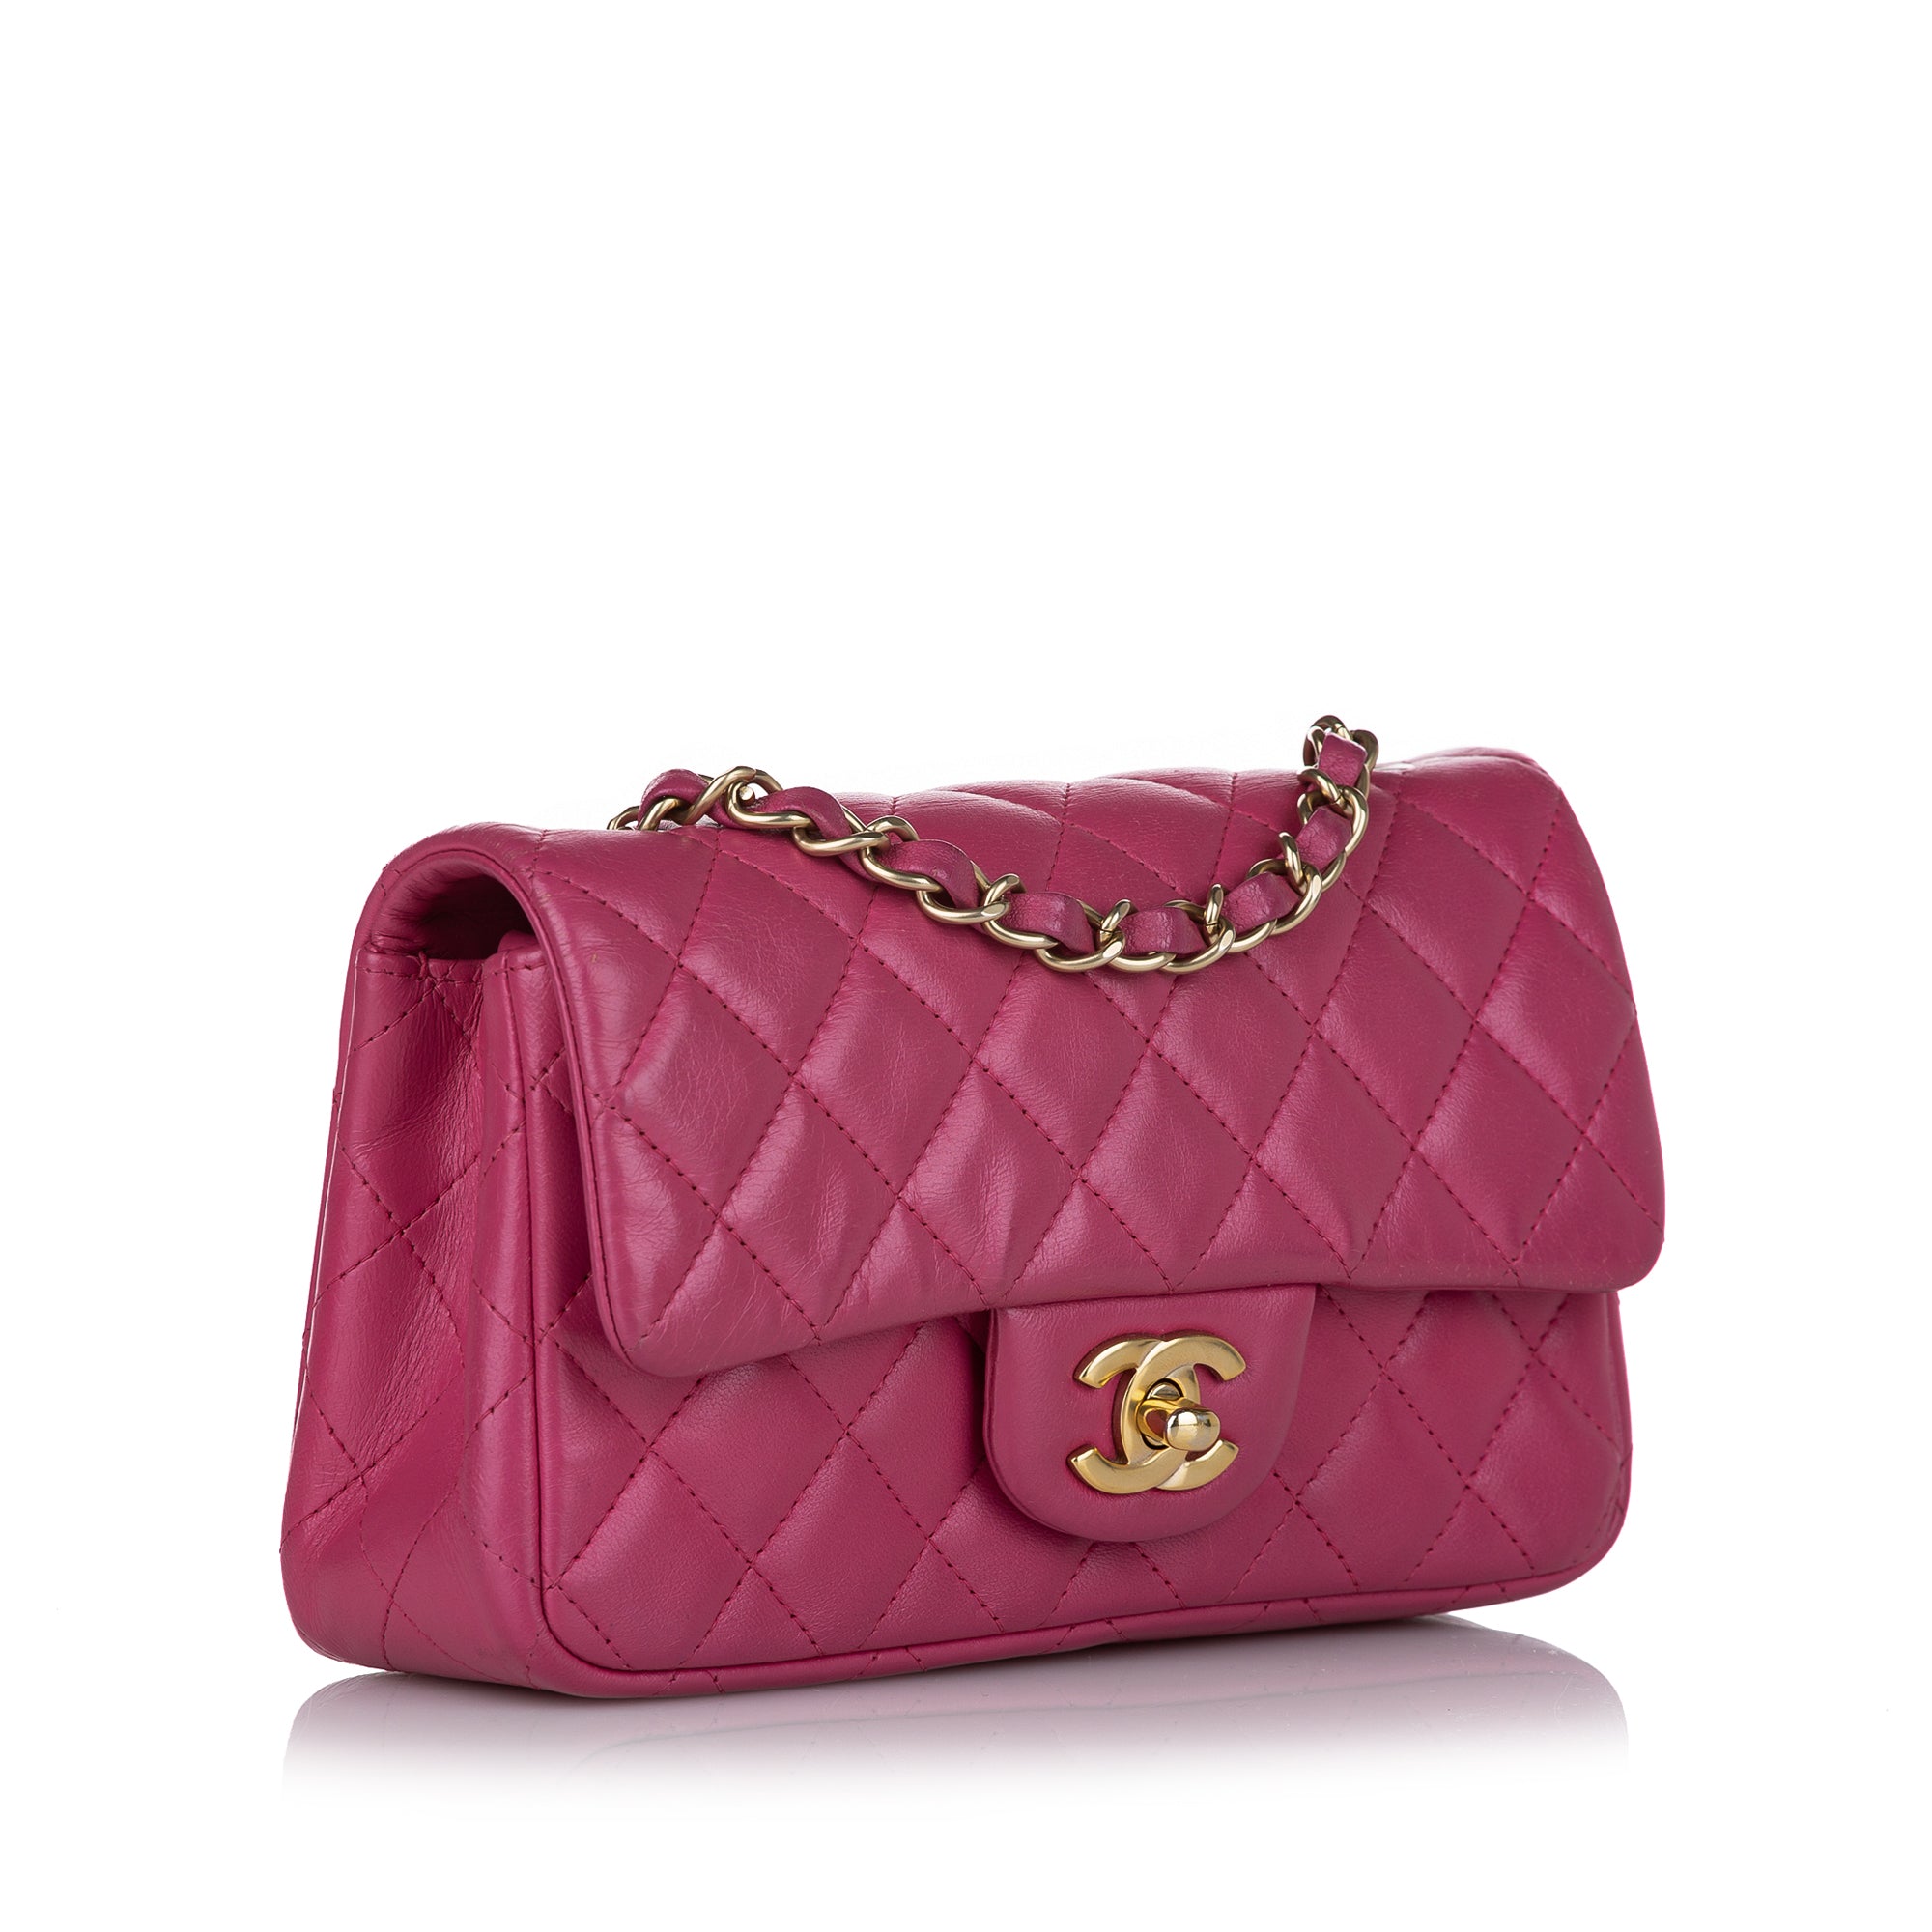 Chanel Purple Quilted Leather New Mini Classic Single Flap Bag Chanel